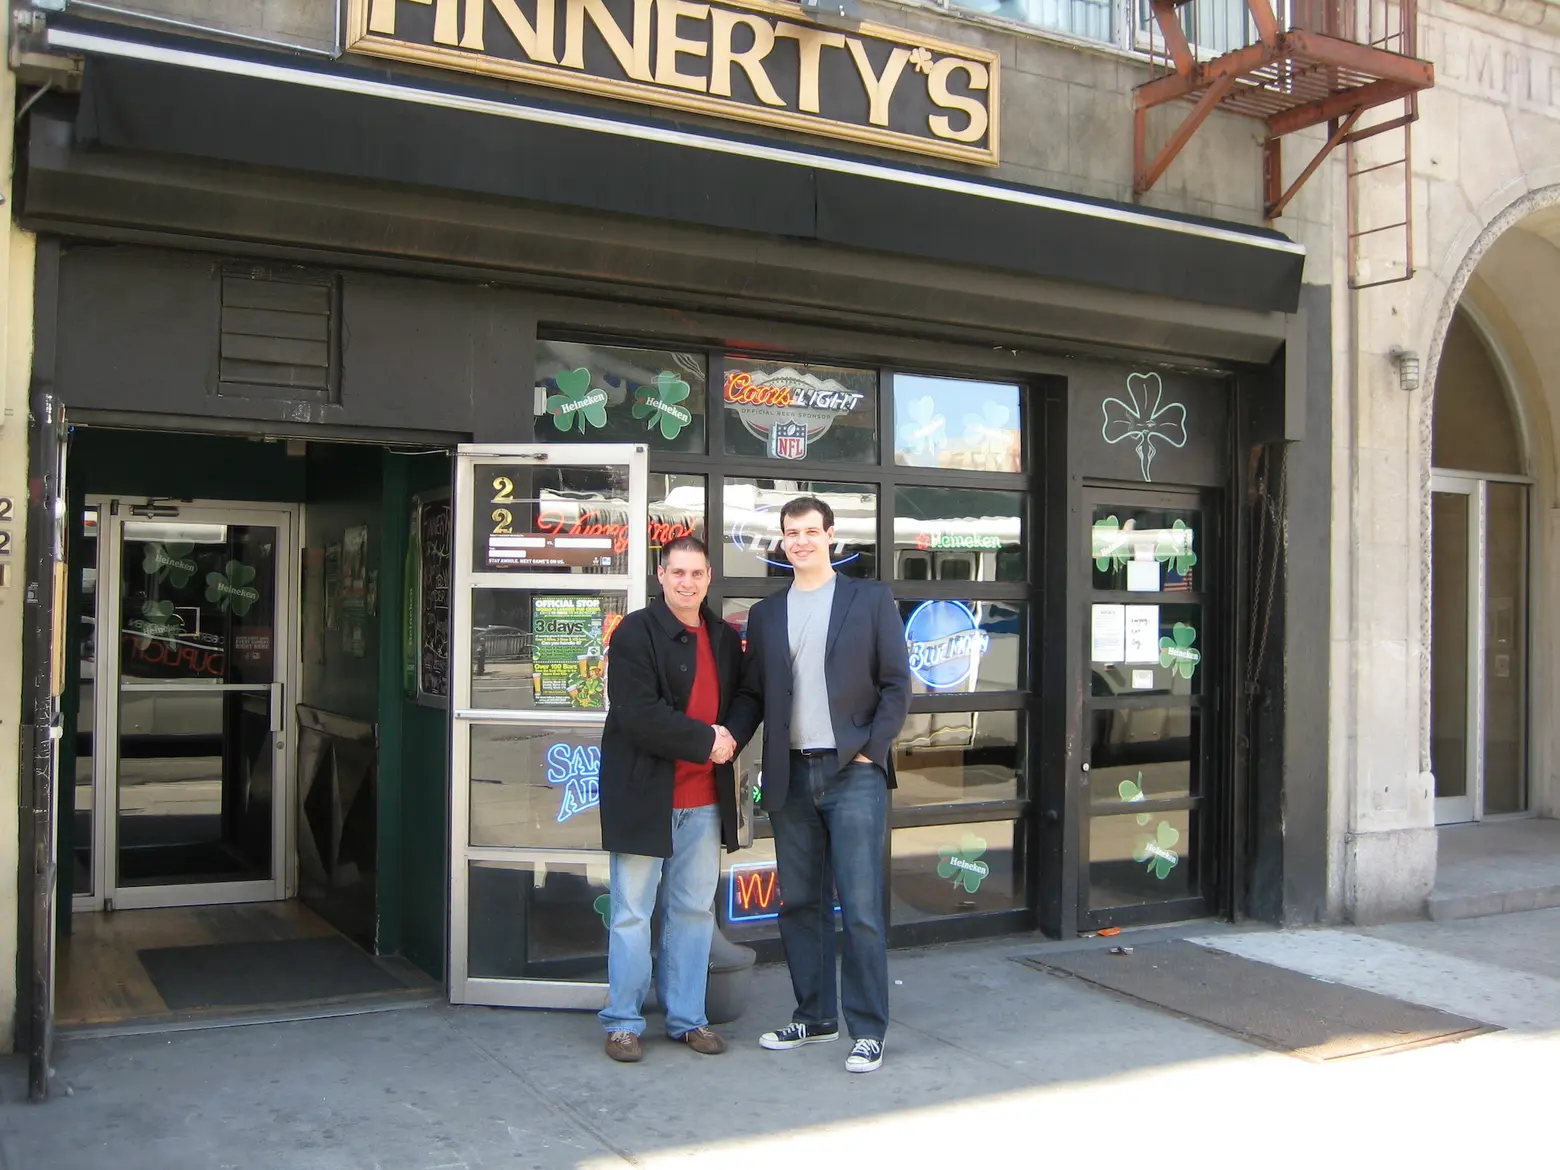 Finnerty’s, popular Bay Area sports bar in the East Village, has permanently closed